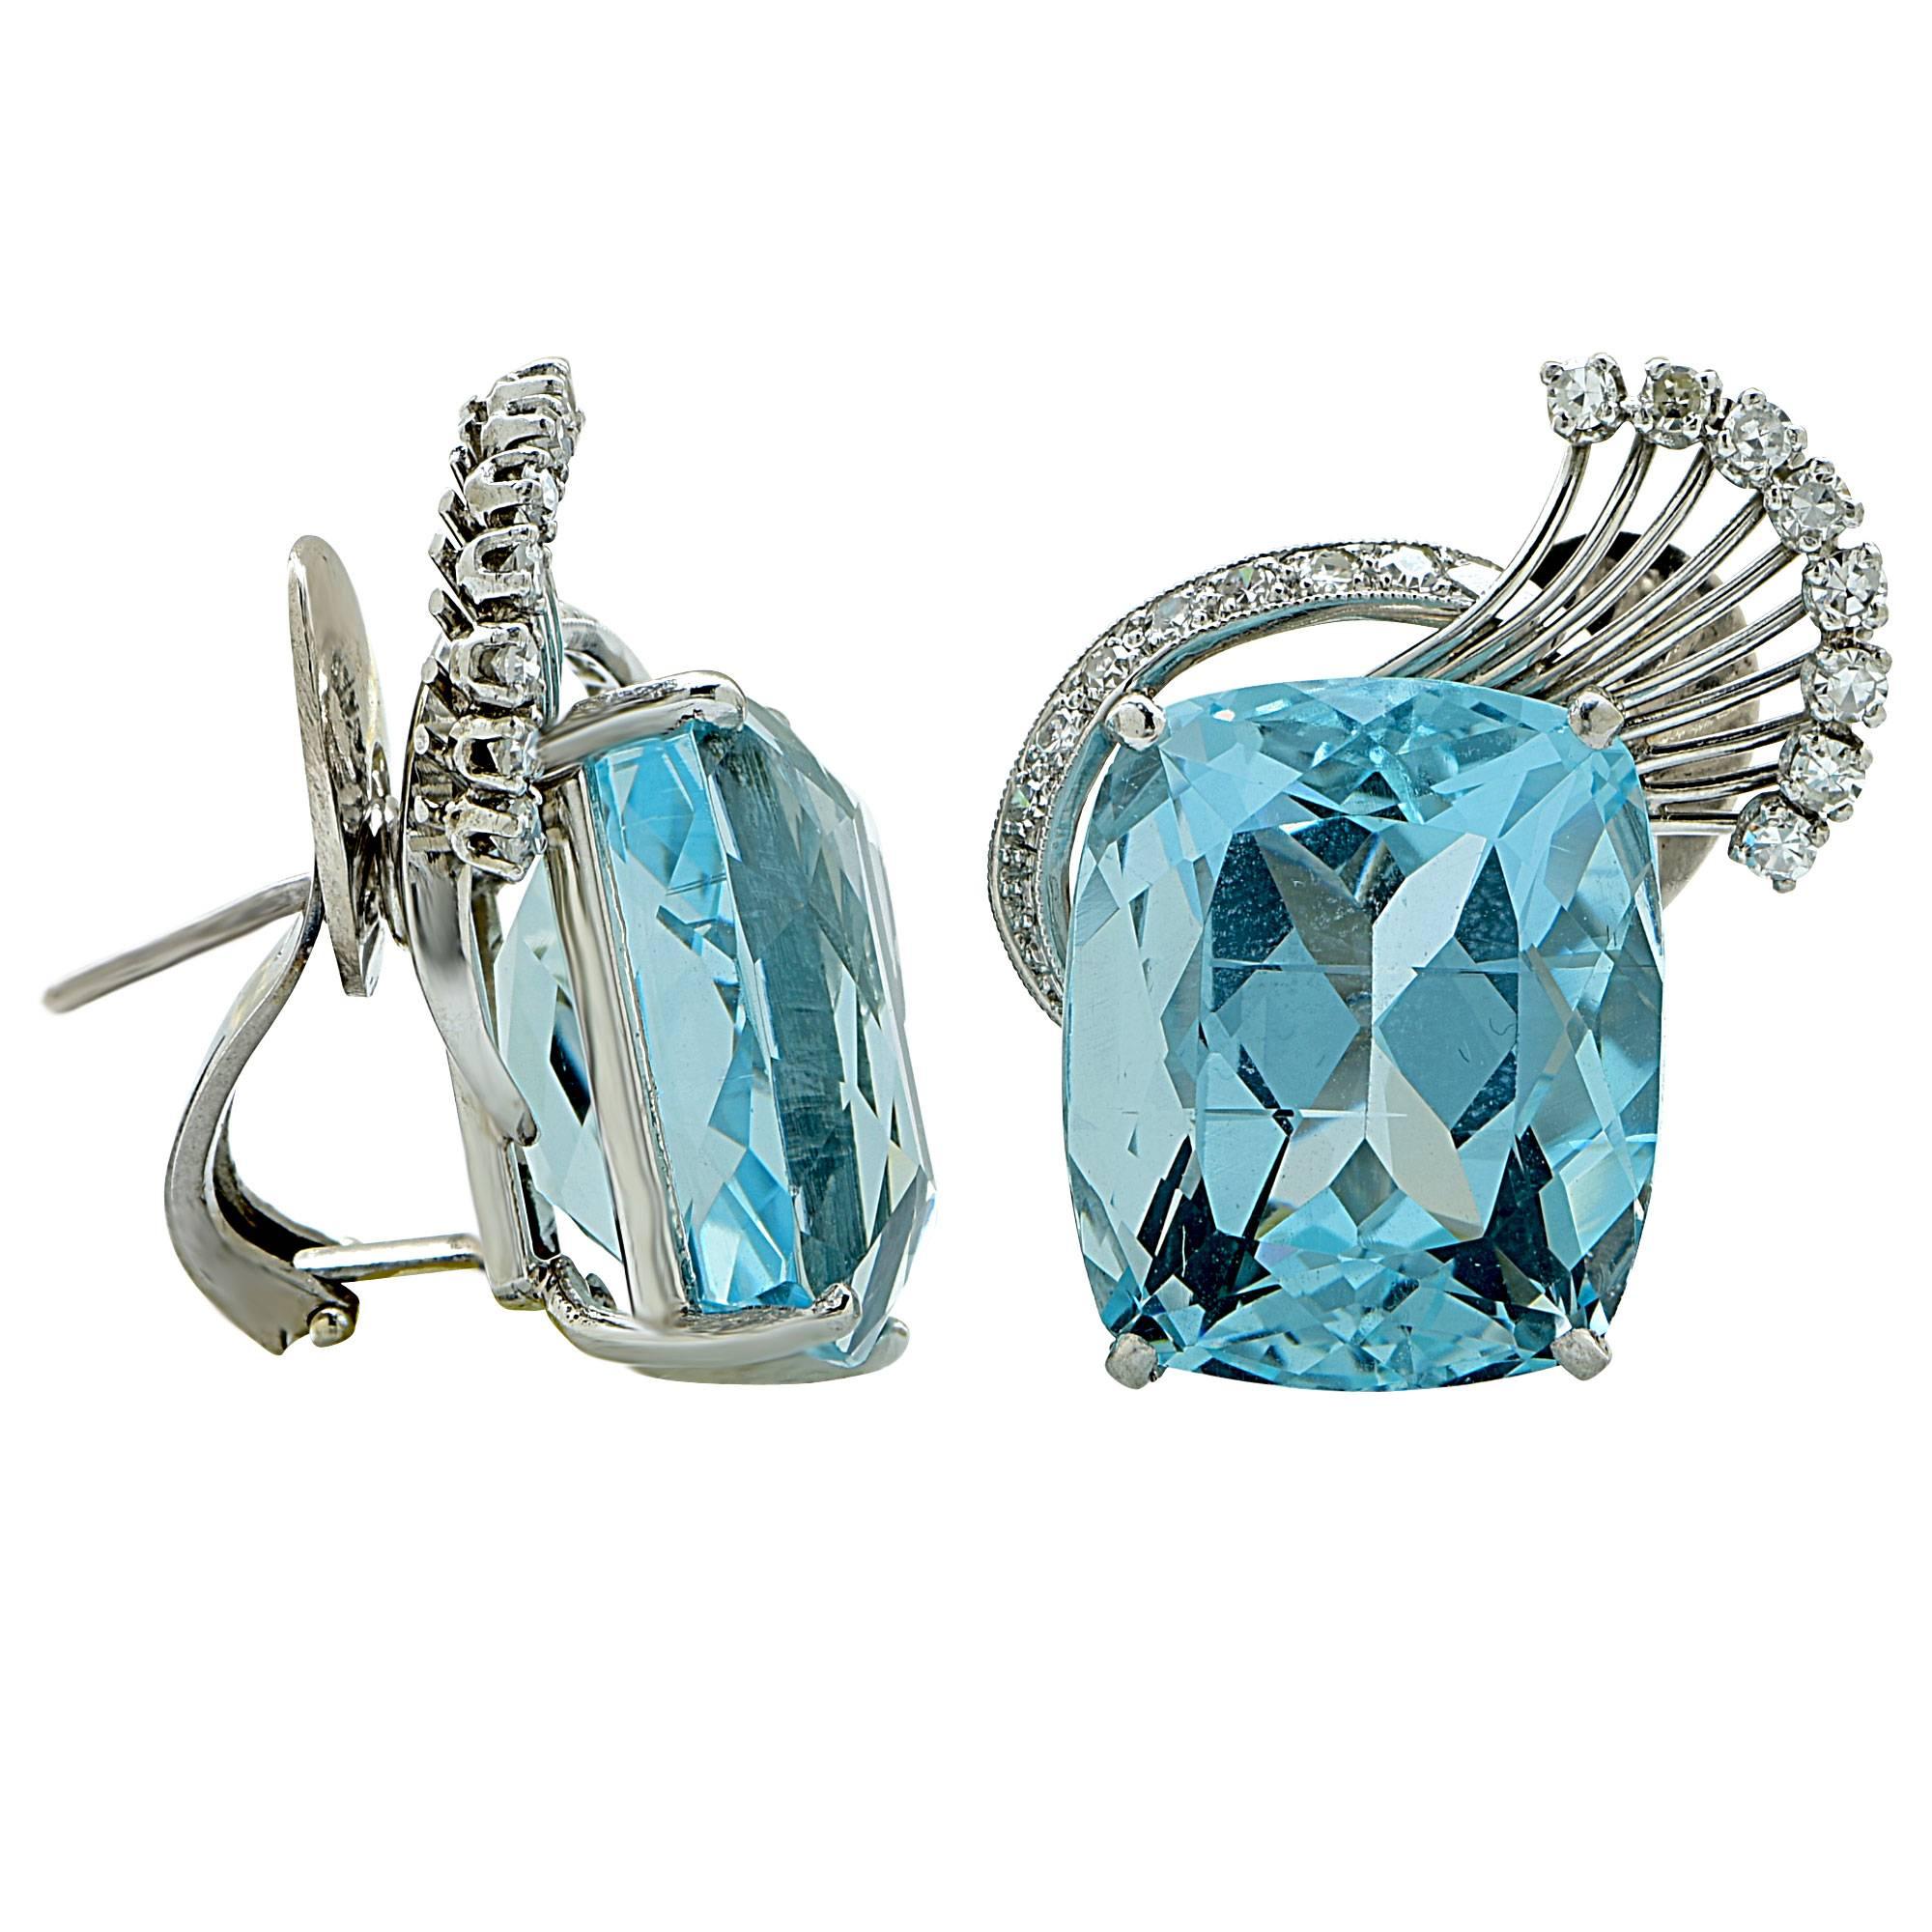 Platinum earrings featuring 2 cushion cut aquamarines weighing approximately 40cts total, accented by 30 single cut diamonds weighing approximately .30cts total, G color VS clarity.

These earrings measure 1.15 inches in height by .82 inch in